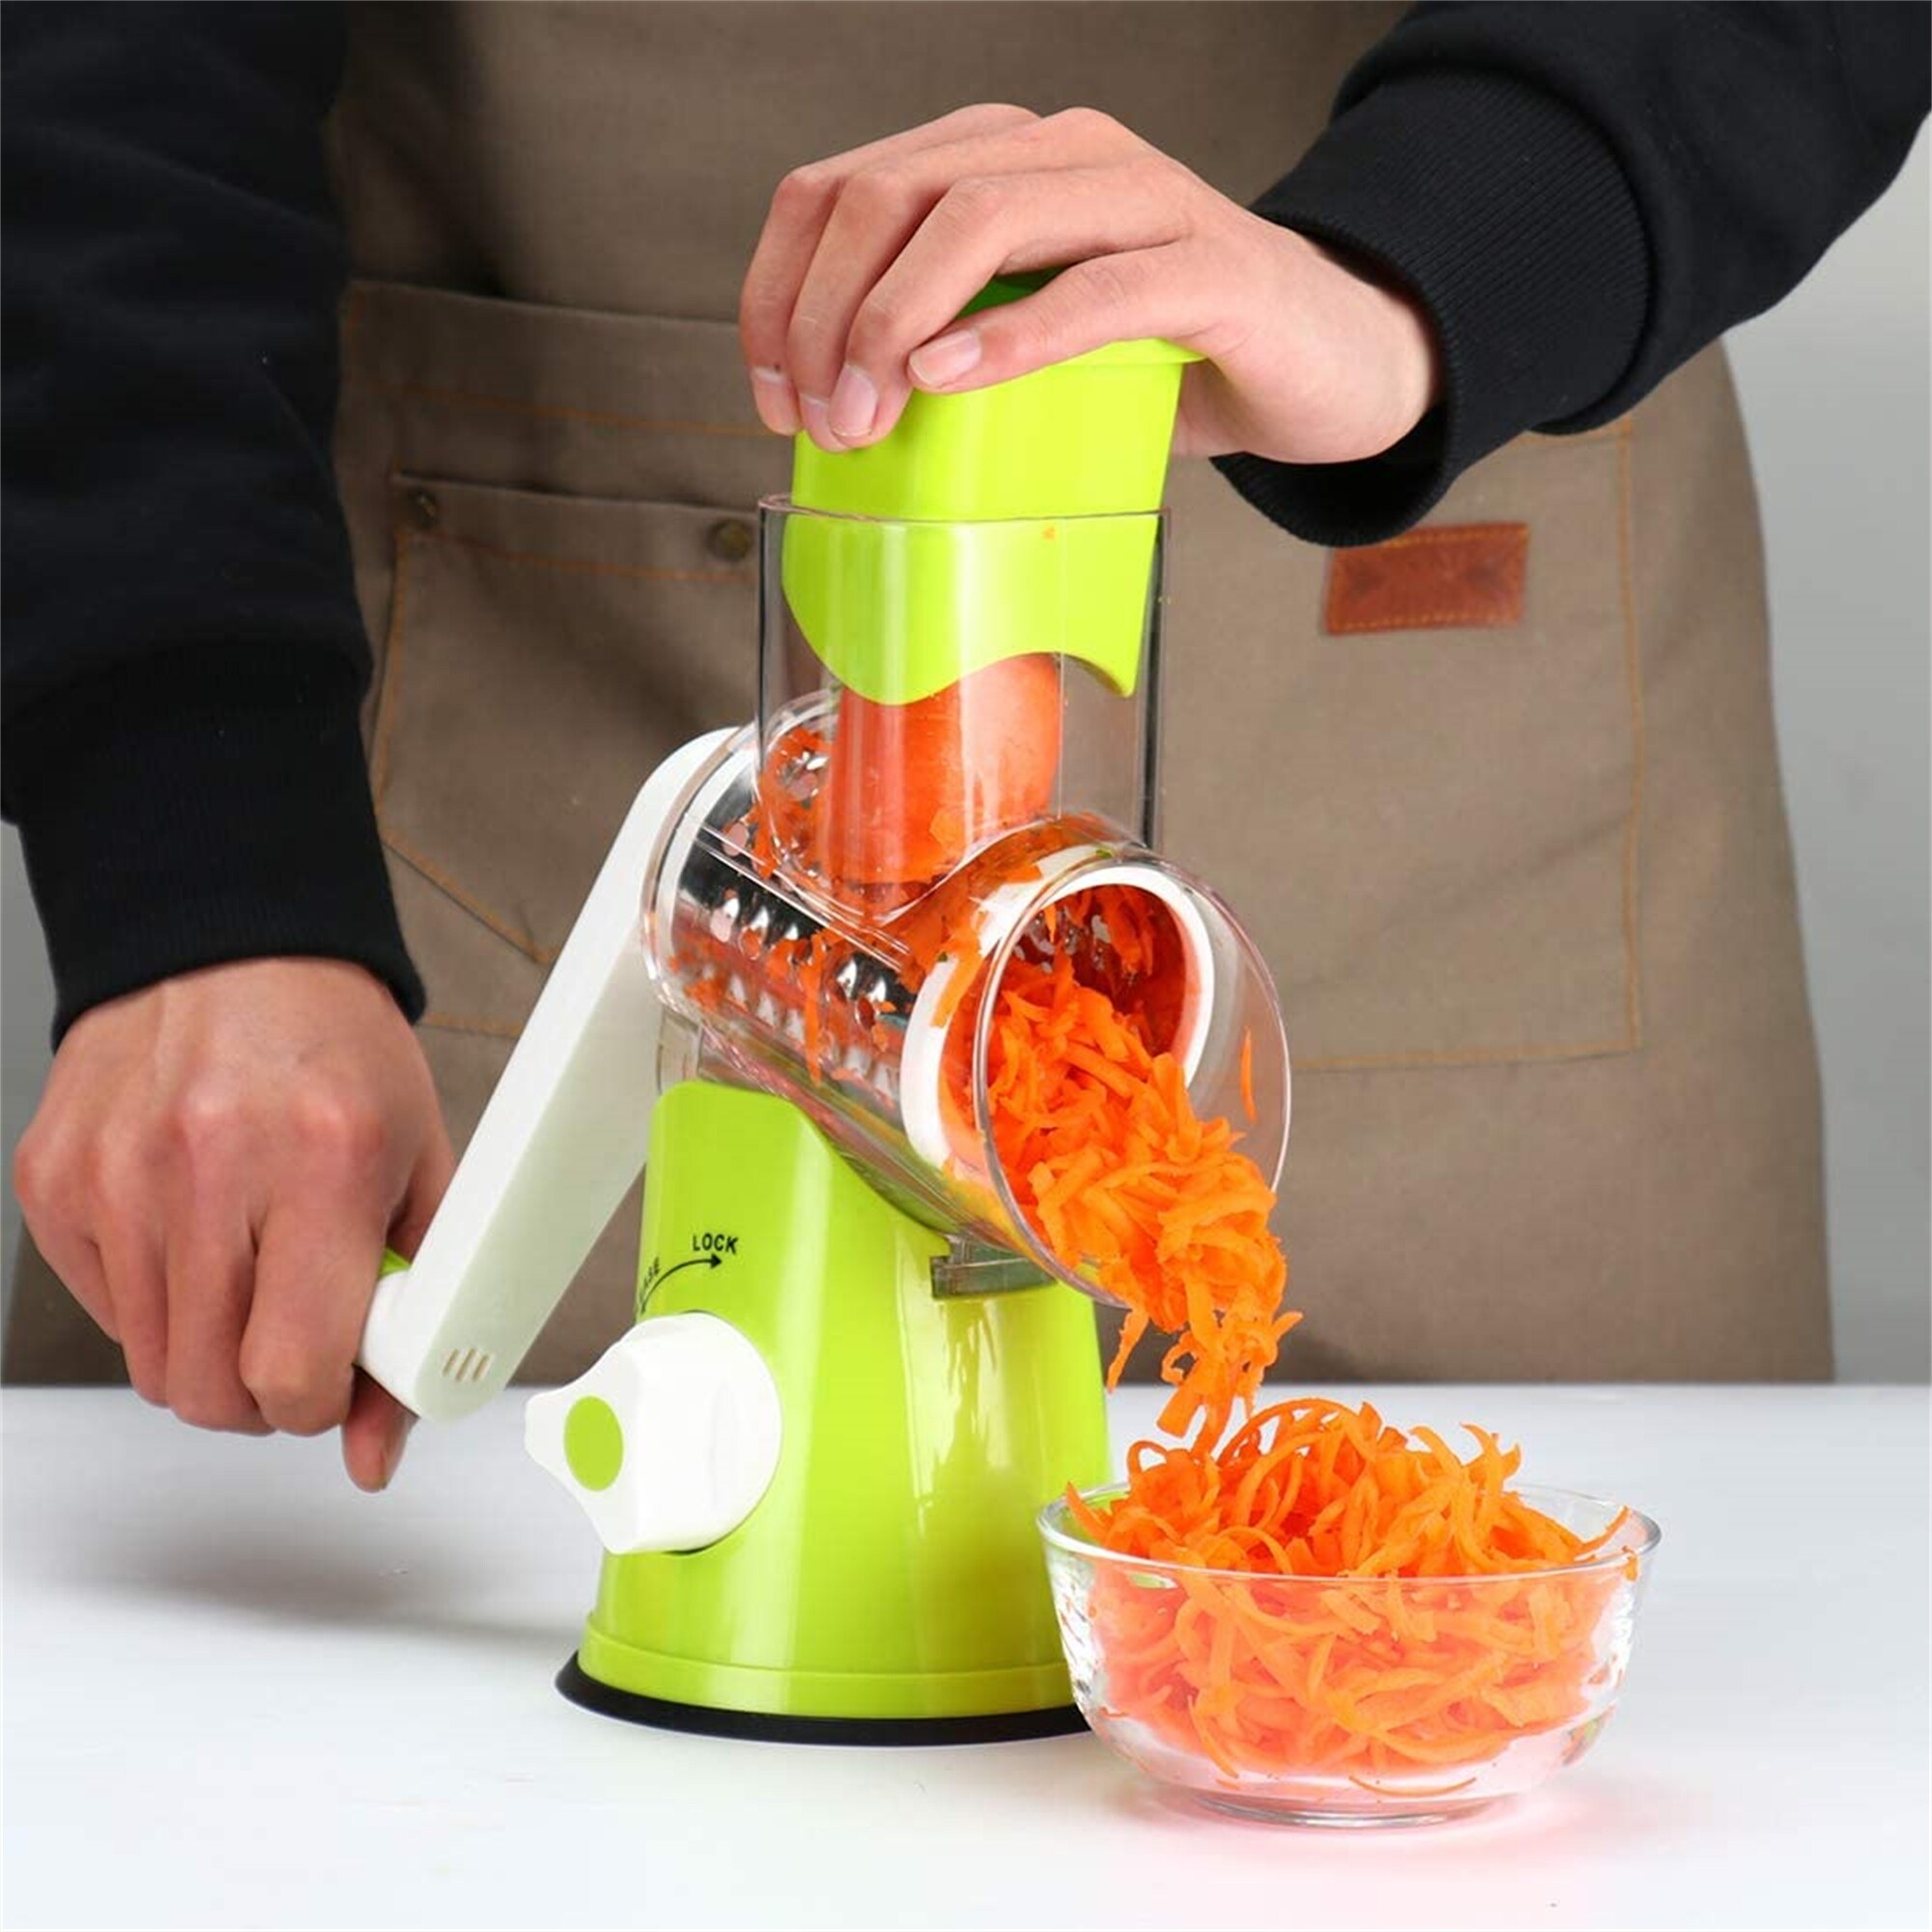 https://ak1.ostkcdn.com/images/products/is/images/direct/1503ed6e0a738743e4988c3735055af076250a74/Rotary-Cheese-Grater-Shredder.jpg